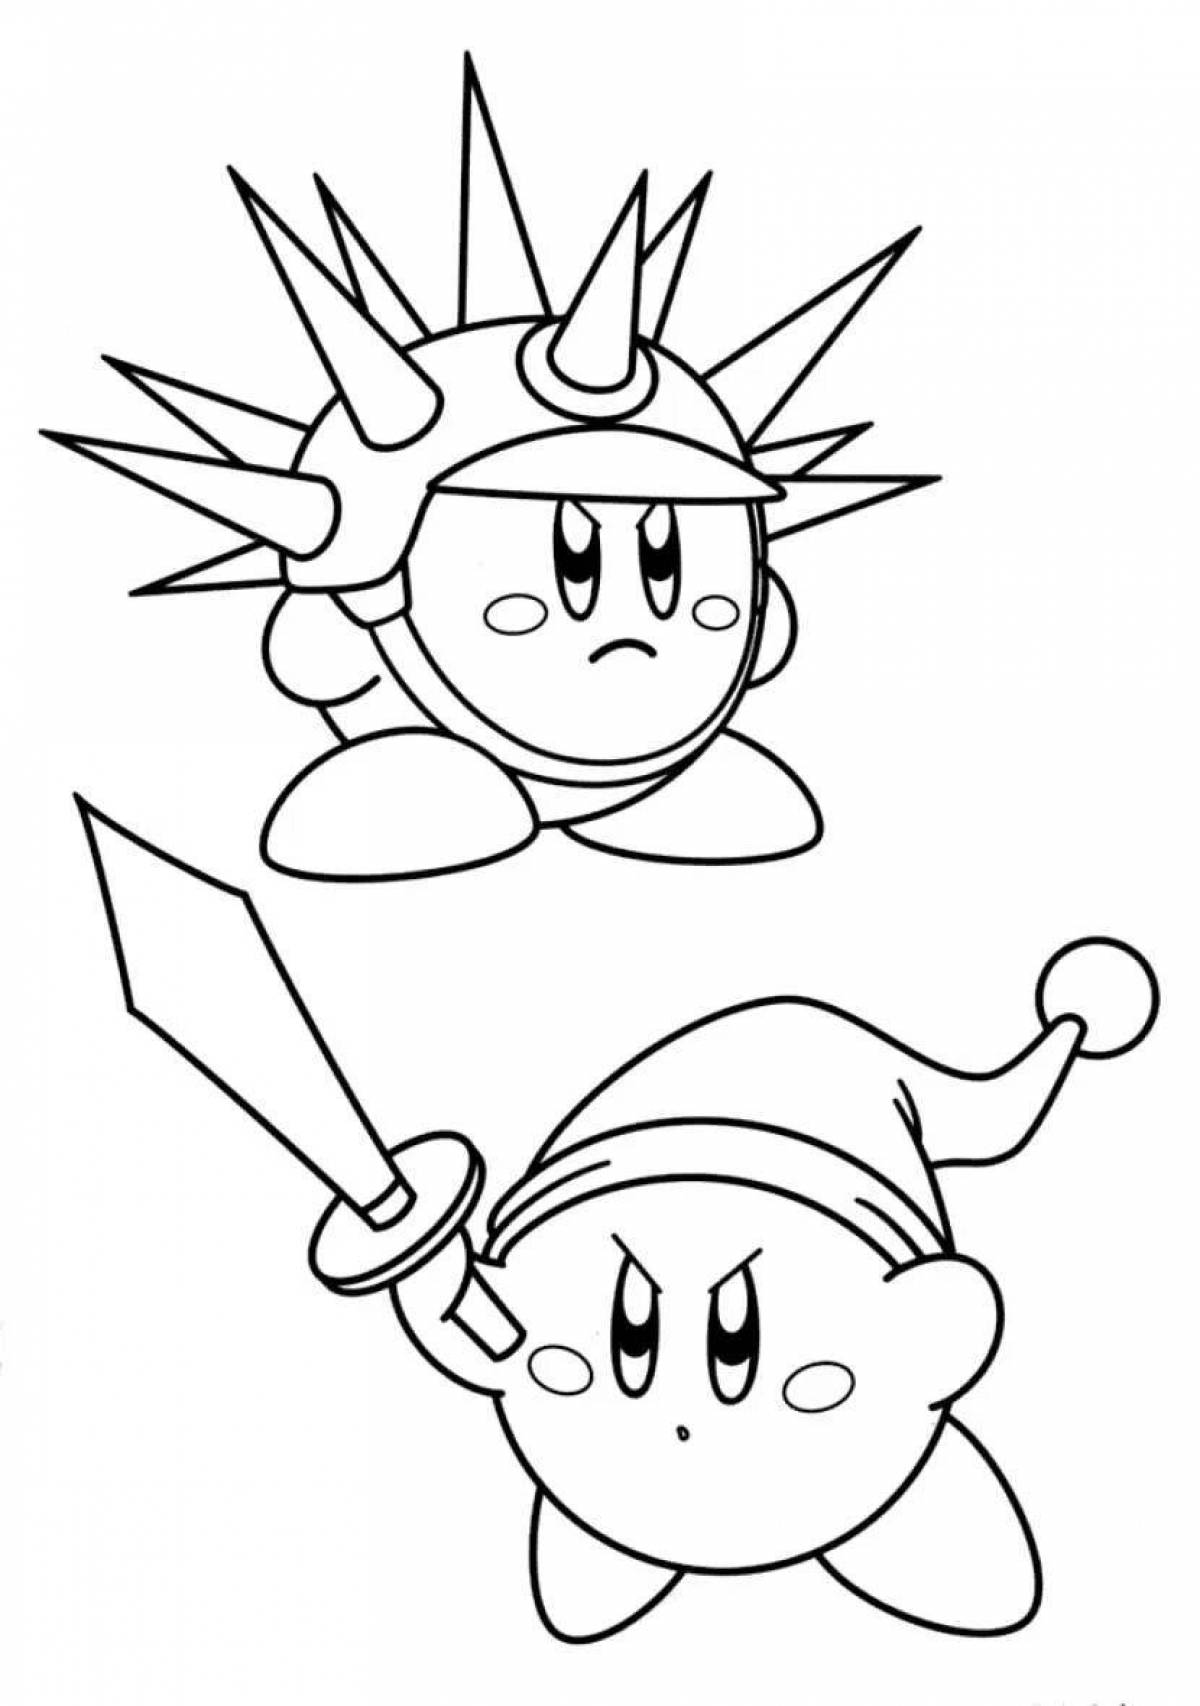 Glowing kirby coloring page